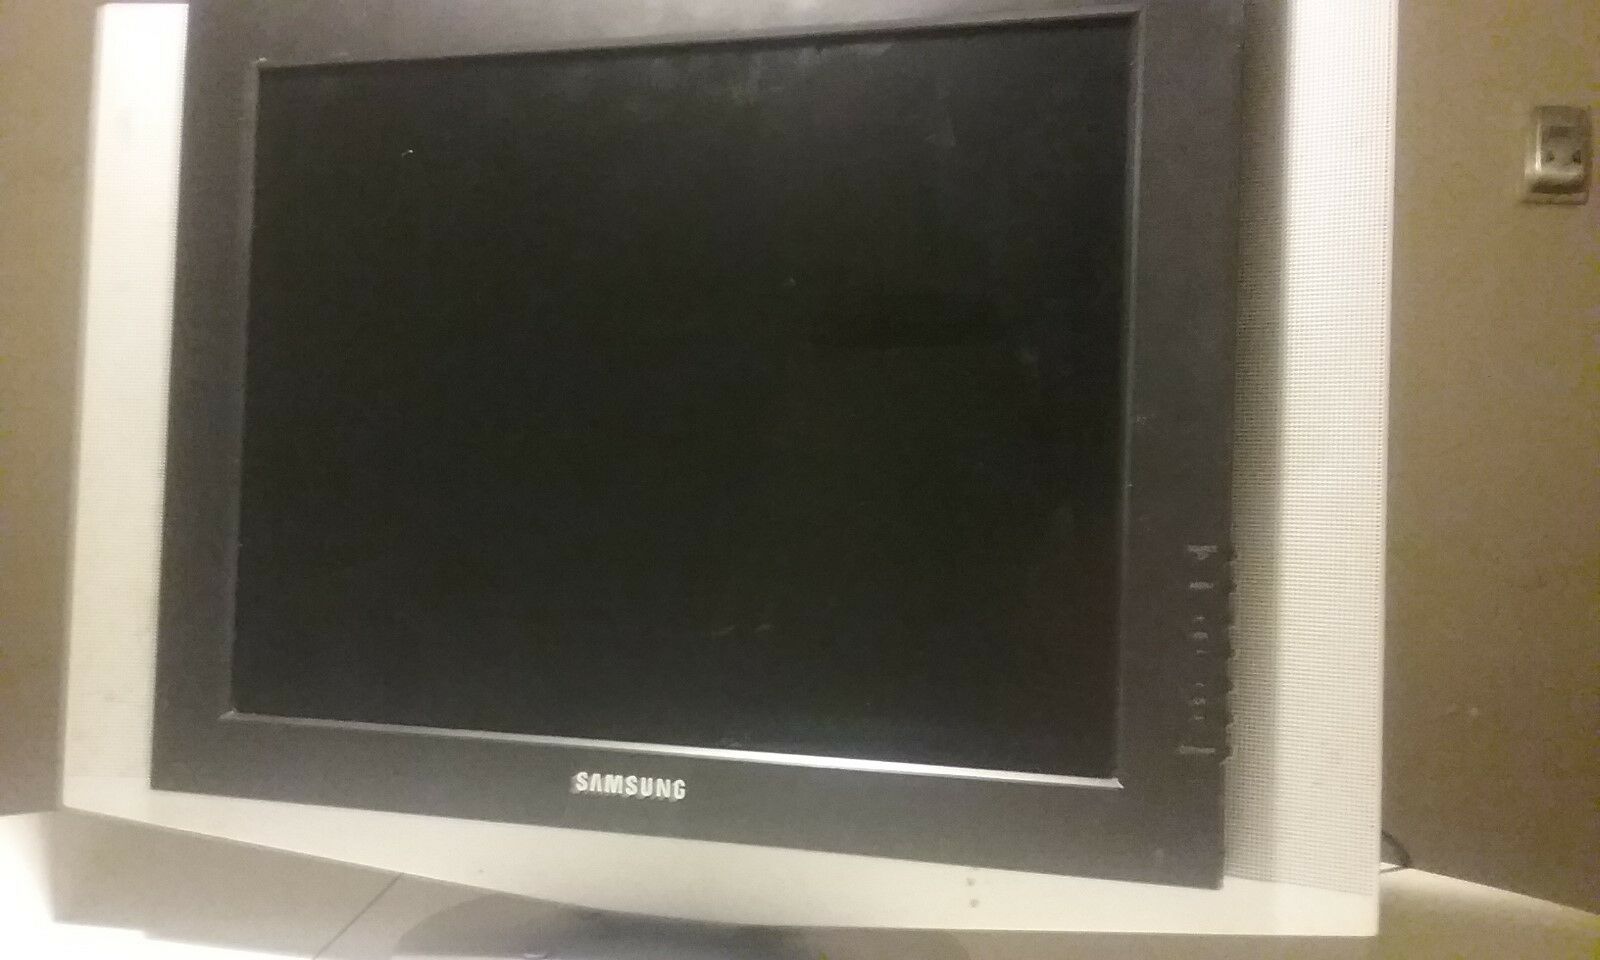 Samsung Modele Number Ln-82341w S User Manual - cleverplaza